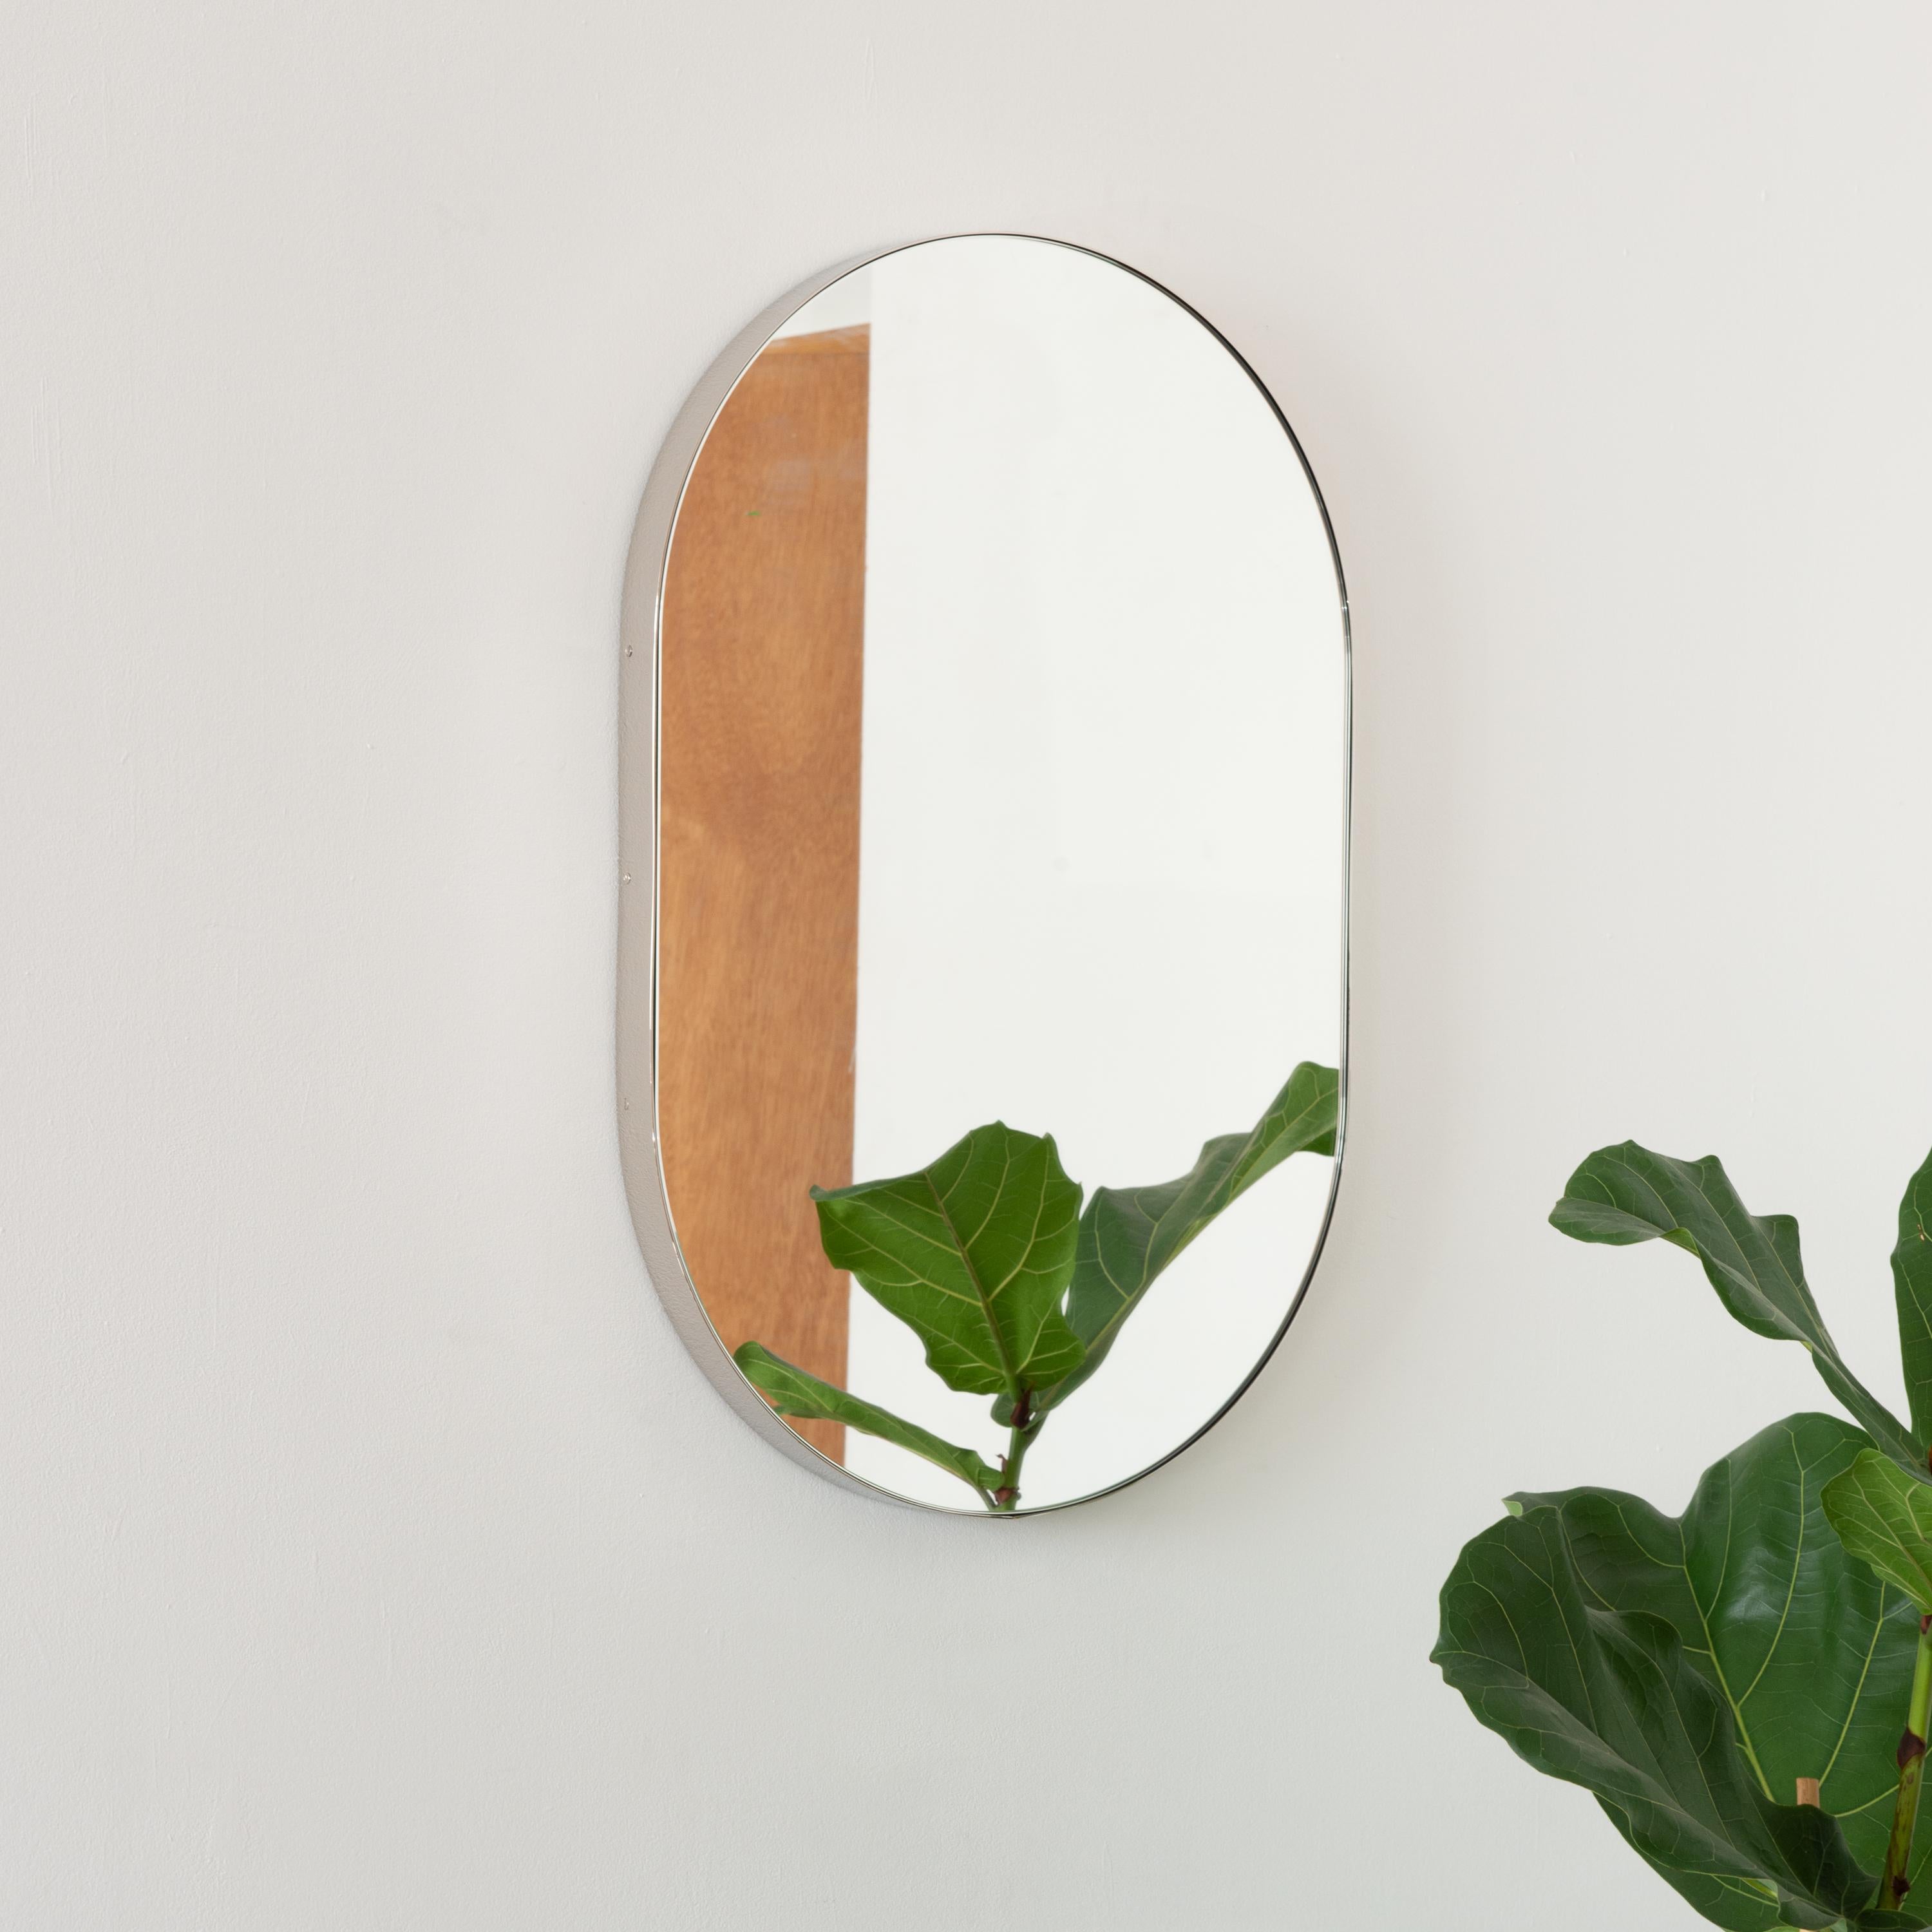 Delightful Capsula™ capsule / pill shaped mirror with an elegant nickel plated frame. Designed and handcrafted in London, UK.

Our mirrors are designed with an integrated French cleat (split batten) system that ensures the mirror is securely mounted